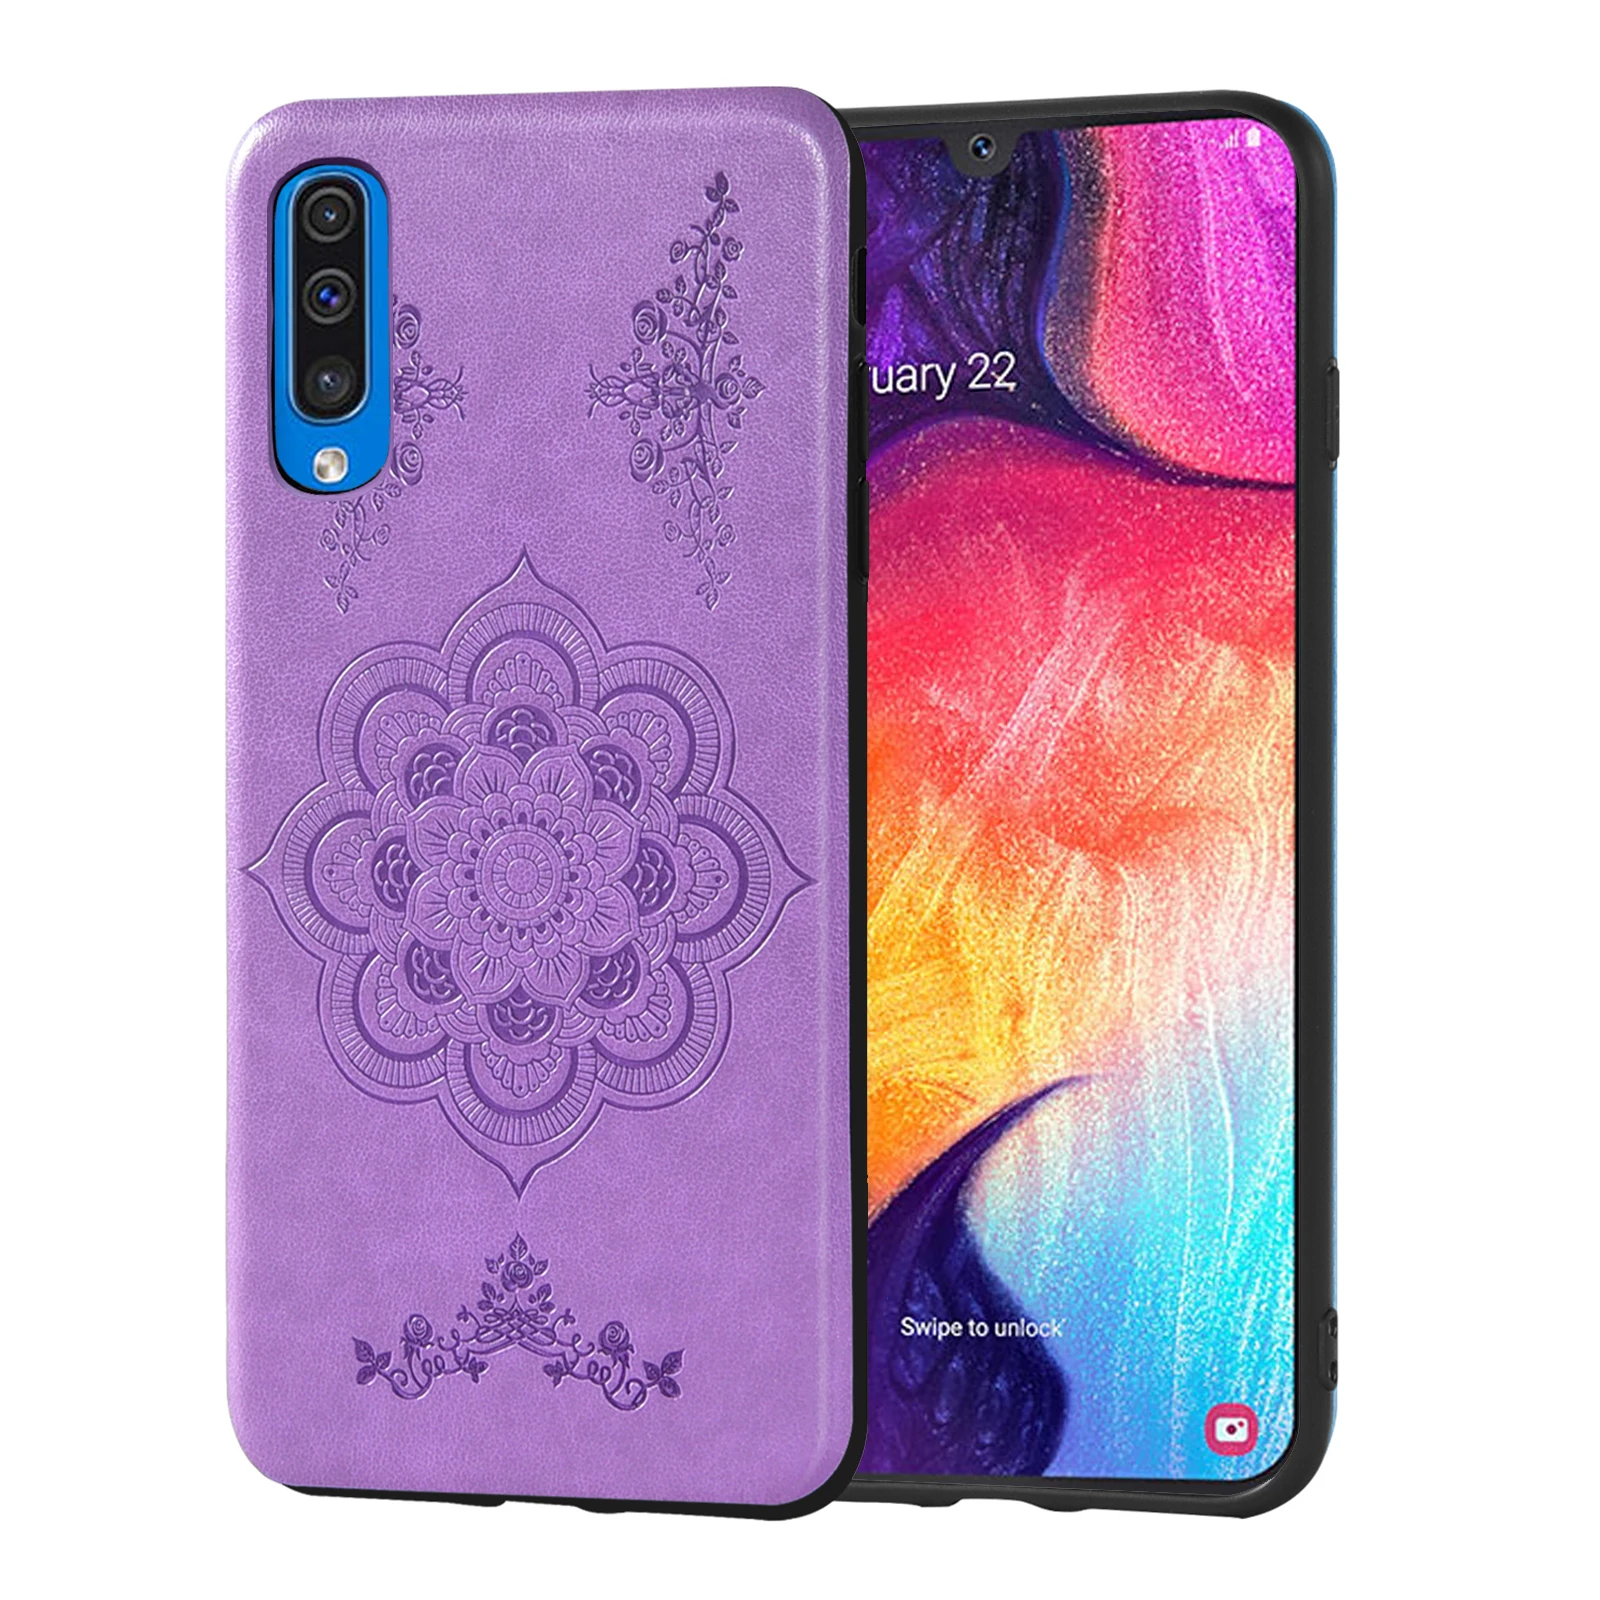 For Samsung Galaxy S9 S8 Plus S7 S6 Active Edge S7Active S5 S3 S4 Mini Case Slim Soft TPU Flower Rugged Leather Cell Phone Cover